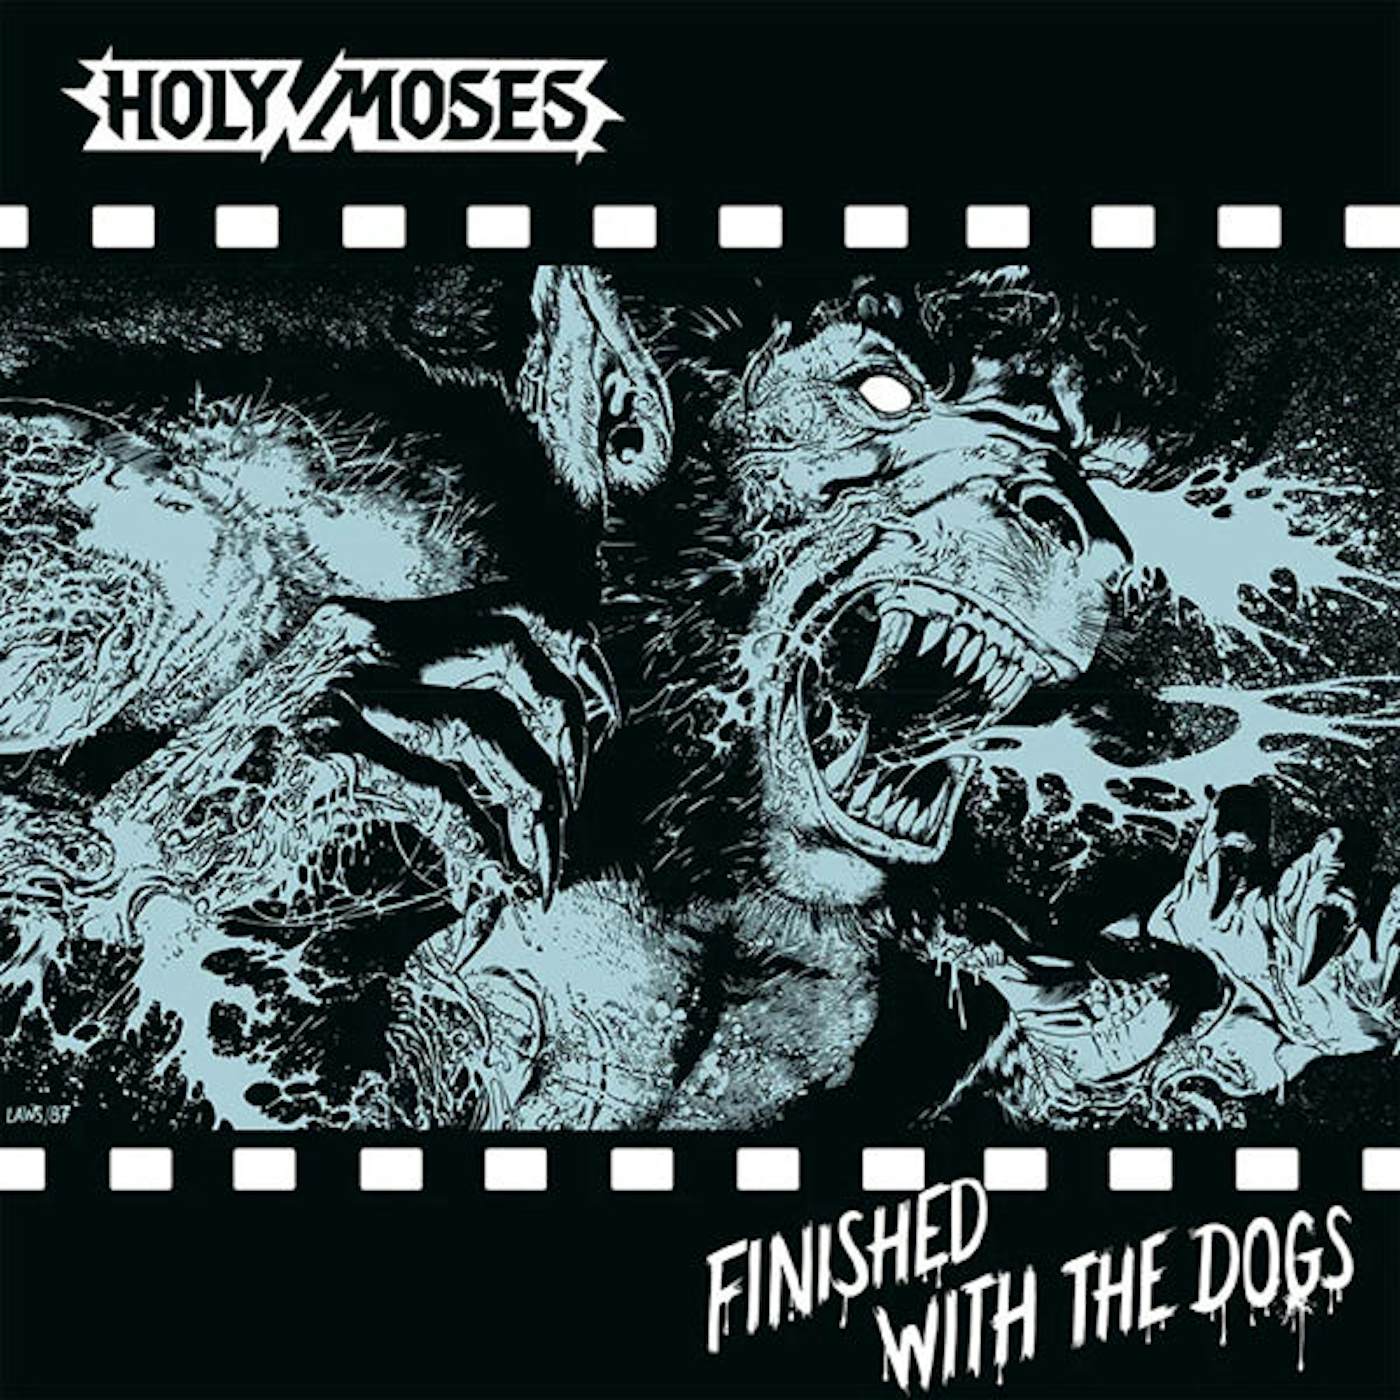 Holy Moses LP - Finished With The Dogs (Mixed Vinyl)